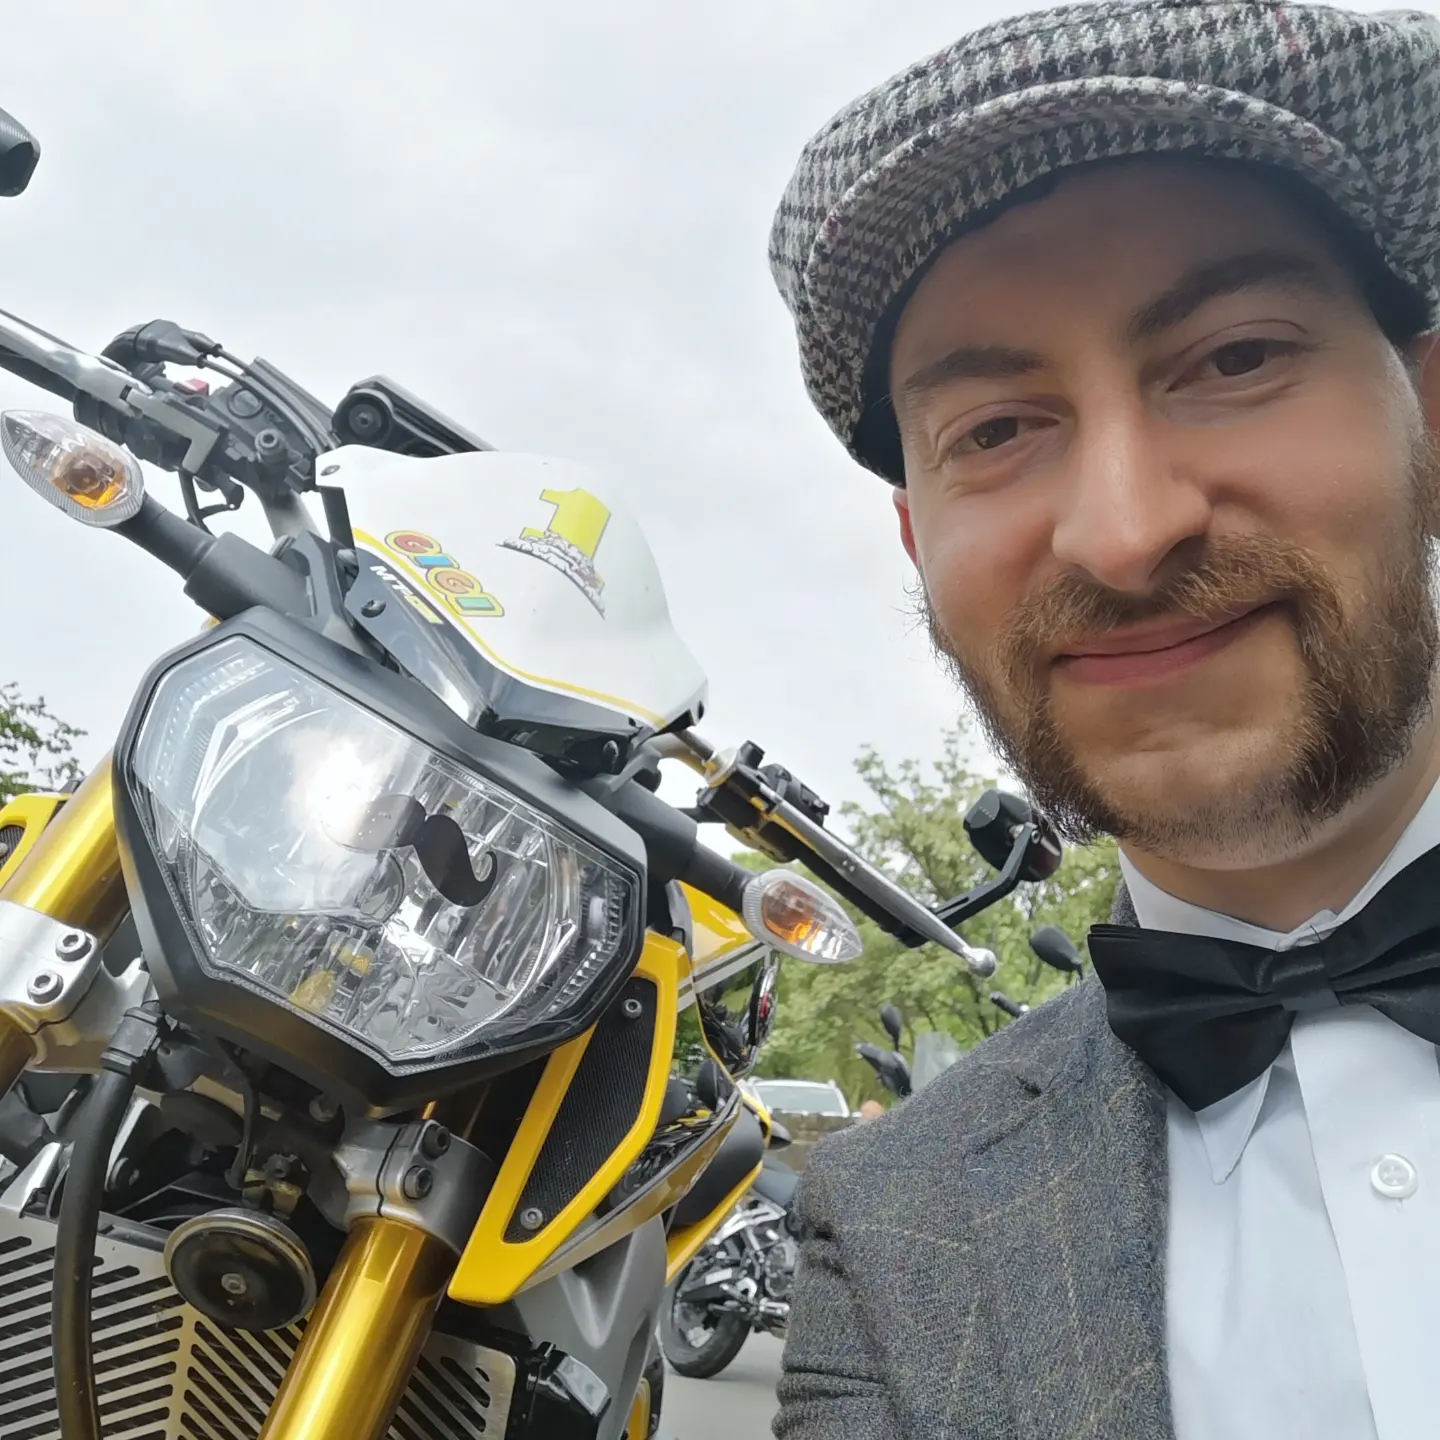 Alfreton lifeguard to complete fundraising Distinguished Gentleman's Ride